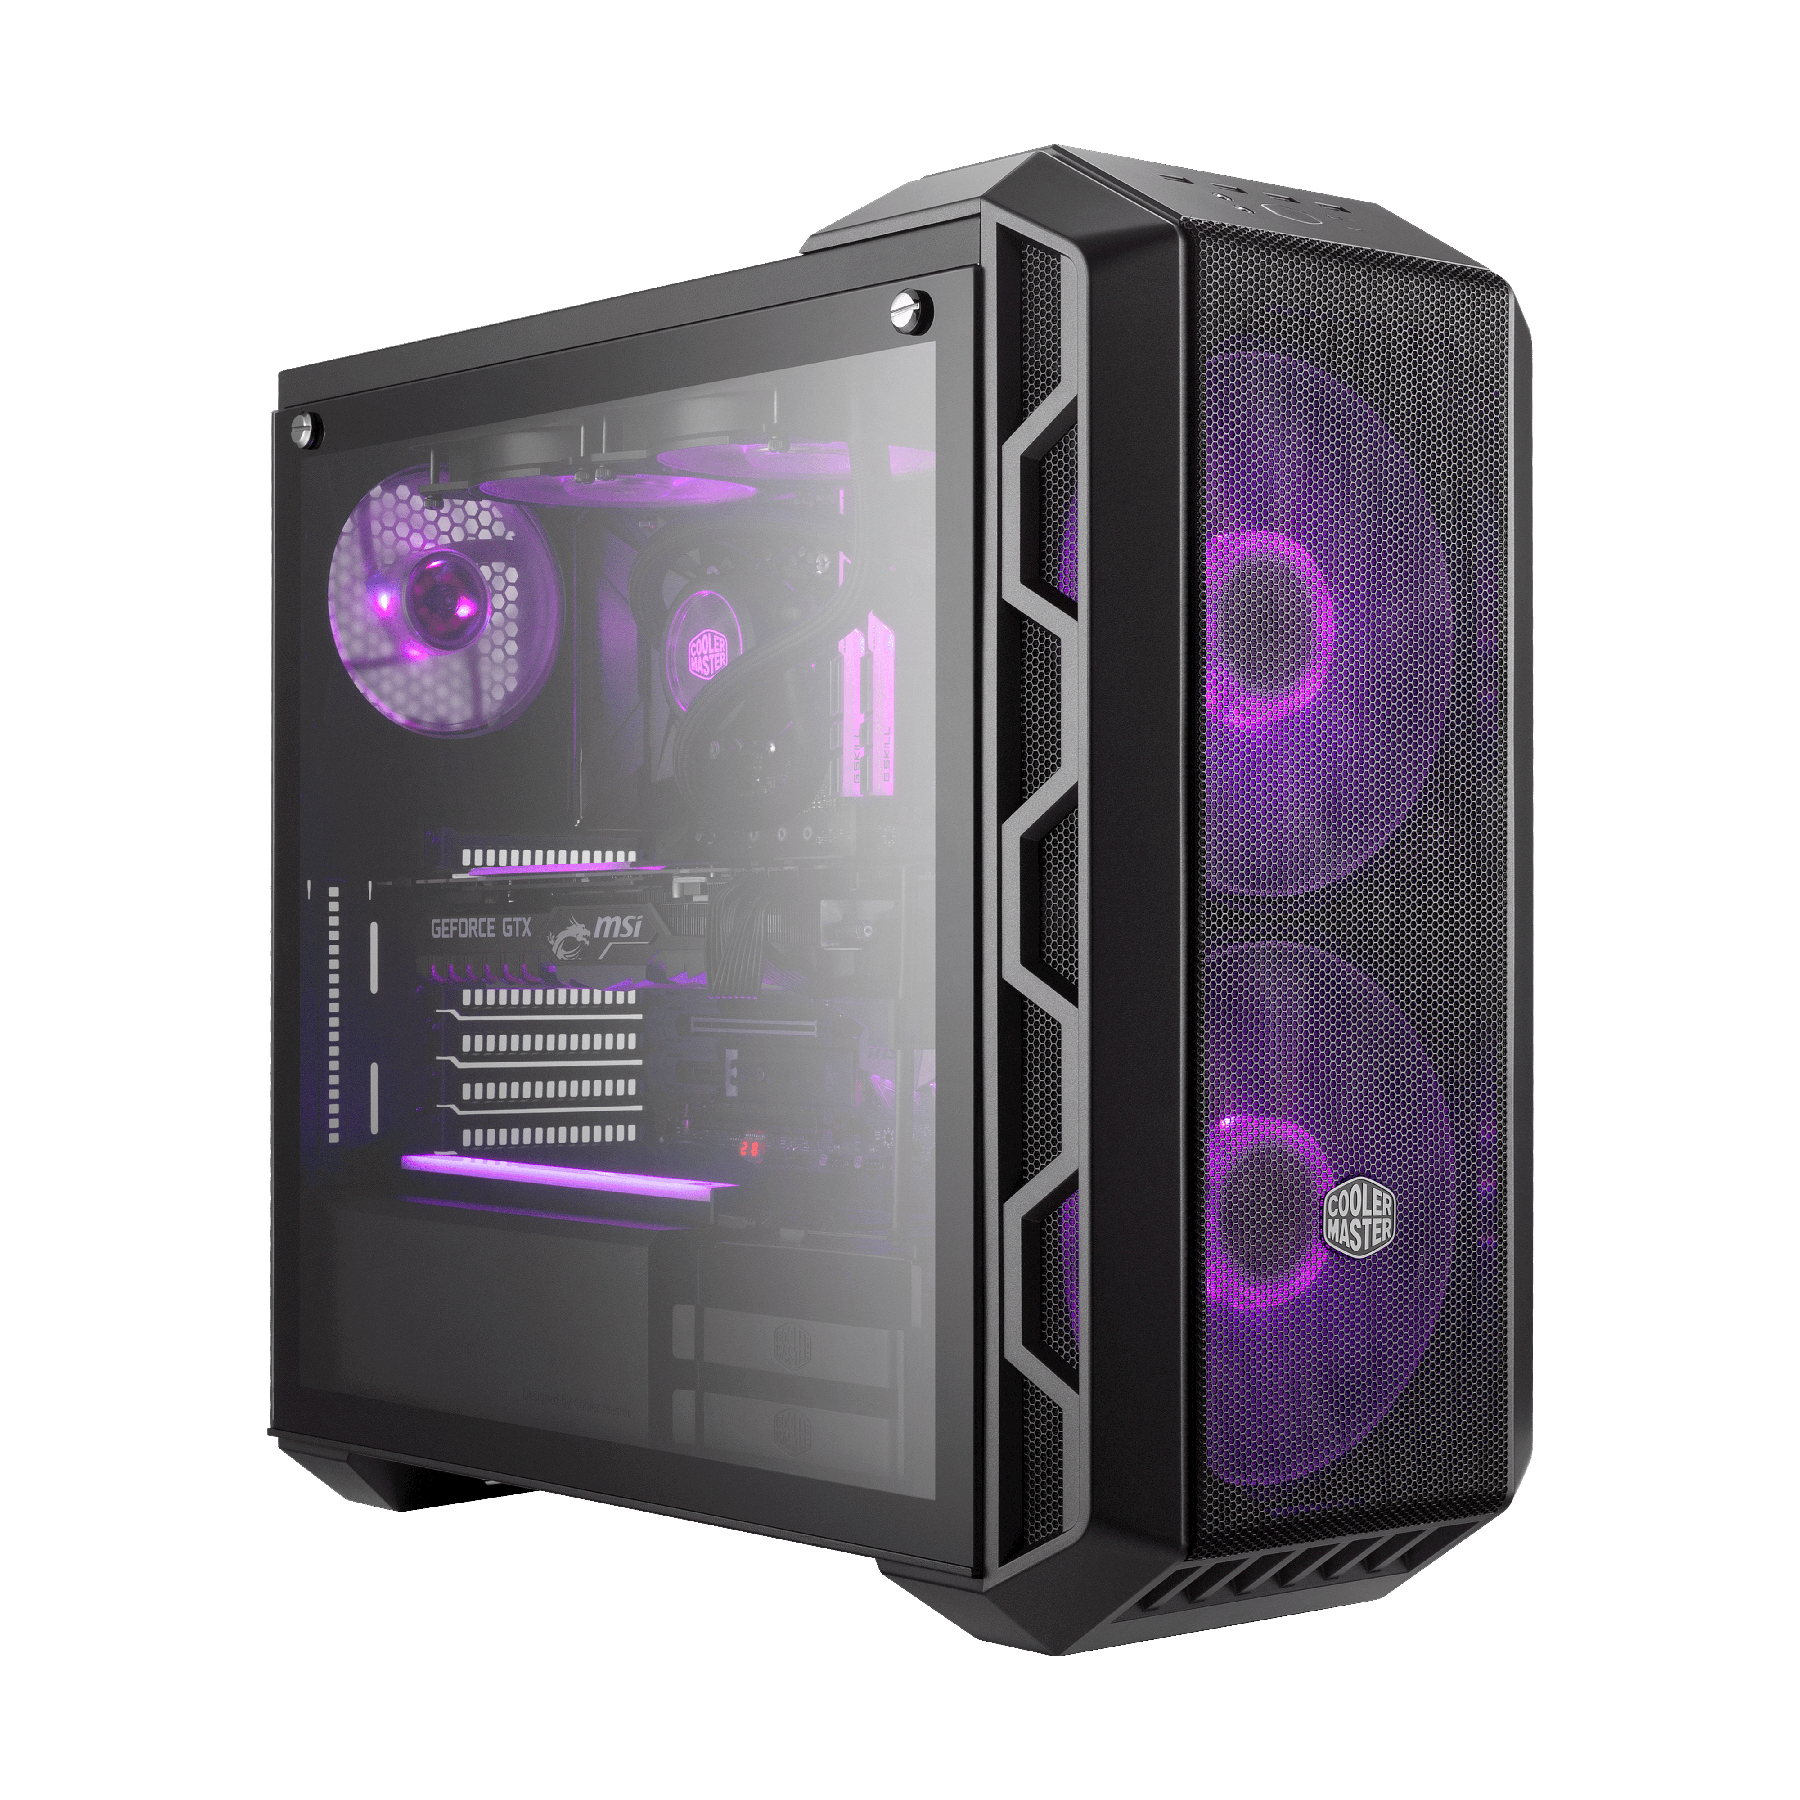 Cooler Master MasterCase H500 ATX Mid-Tower w/ Tempered Glass Side Panel, Transparent/ Mesh Front Option, Carrying Handle & 2x 200mm RGB Fans w/RGB Controller